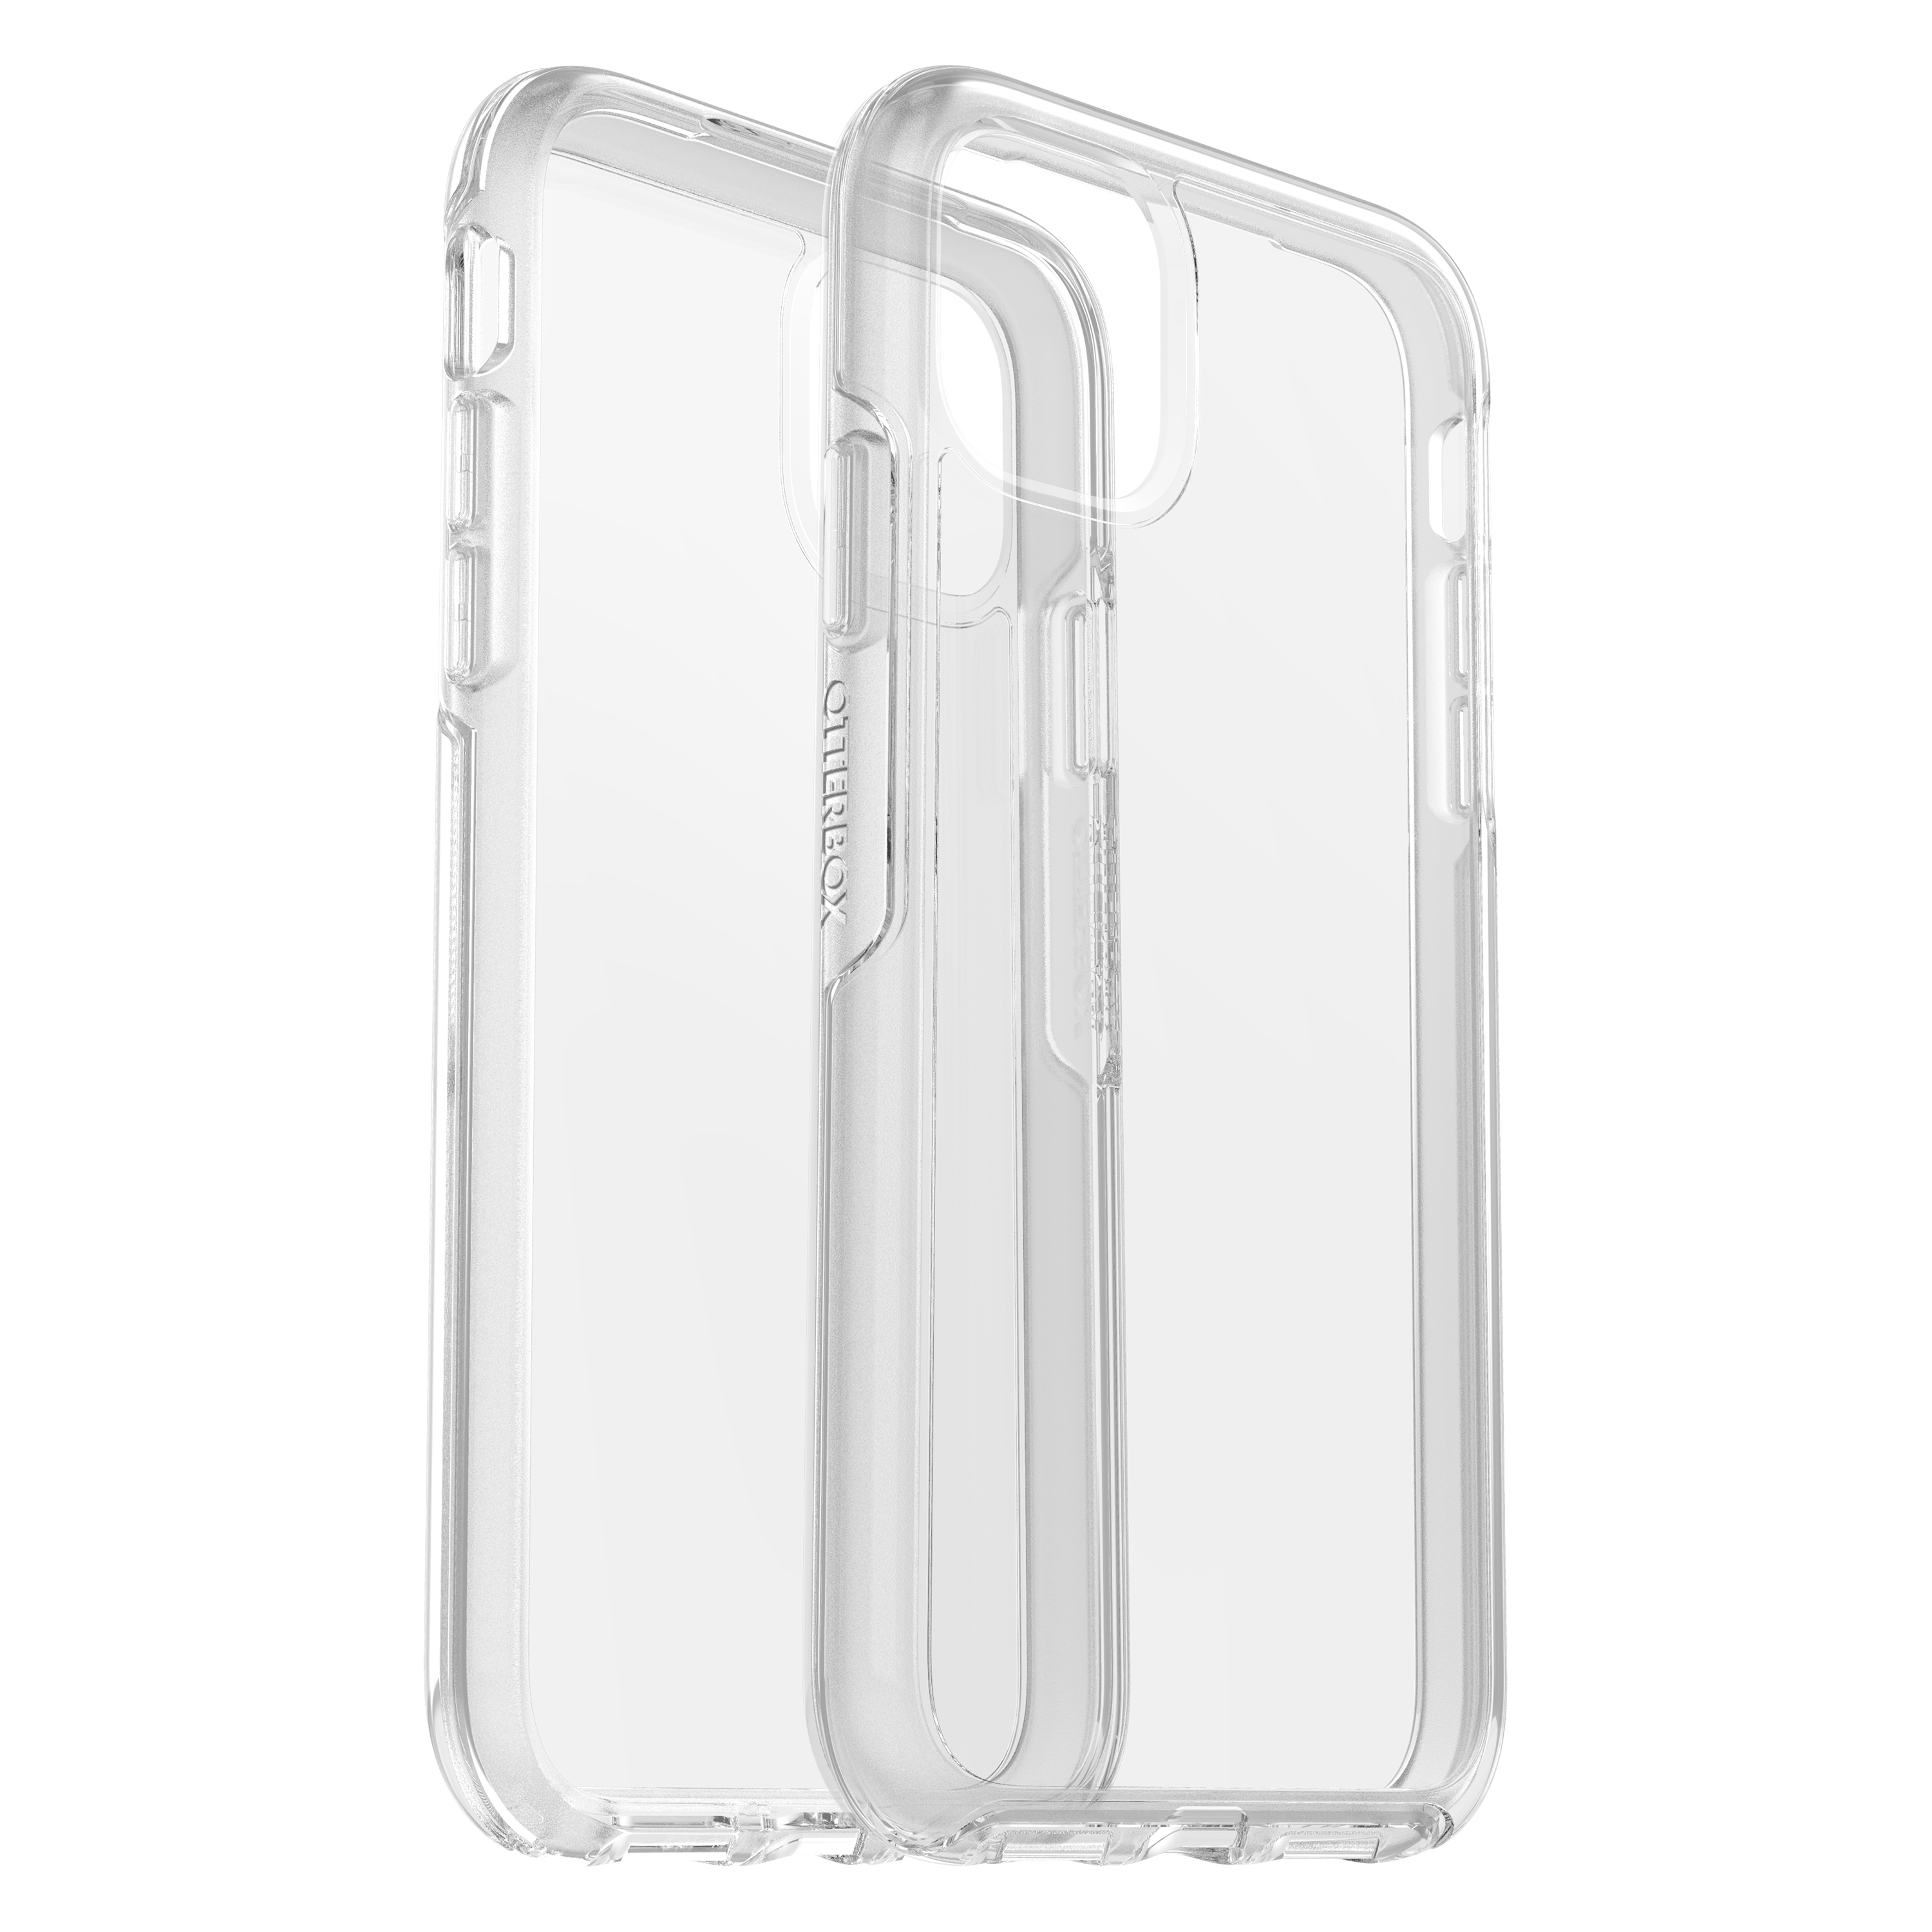 iPhone 11, Apple, Symmetry Transparent Clear, OTTERBOX Backcover,